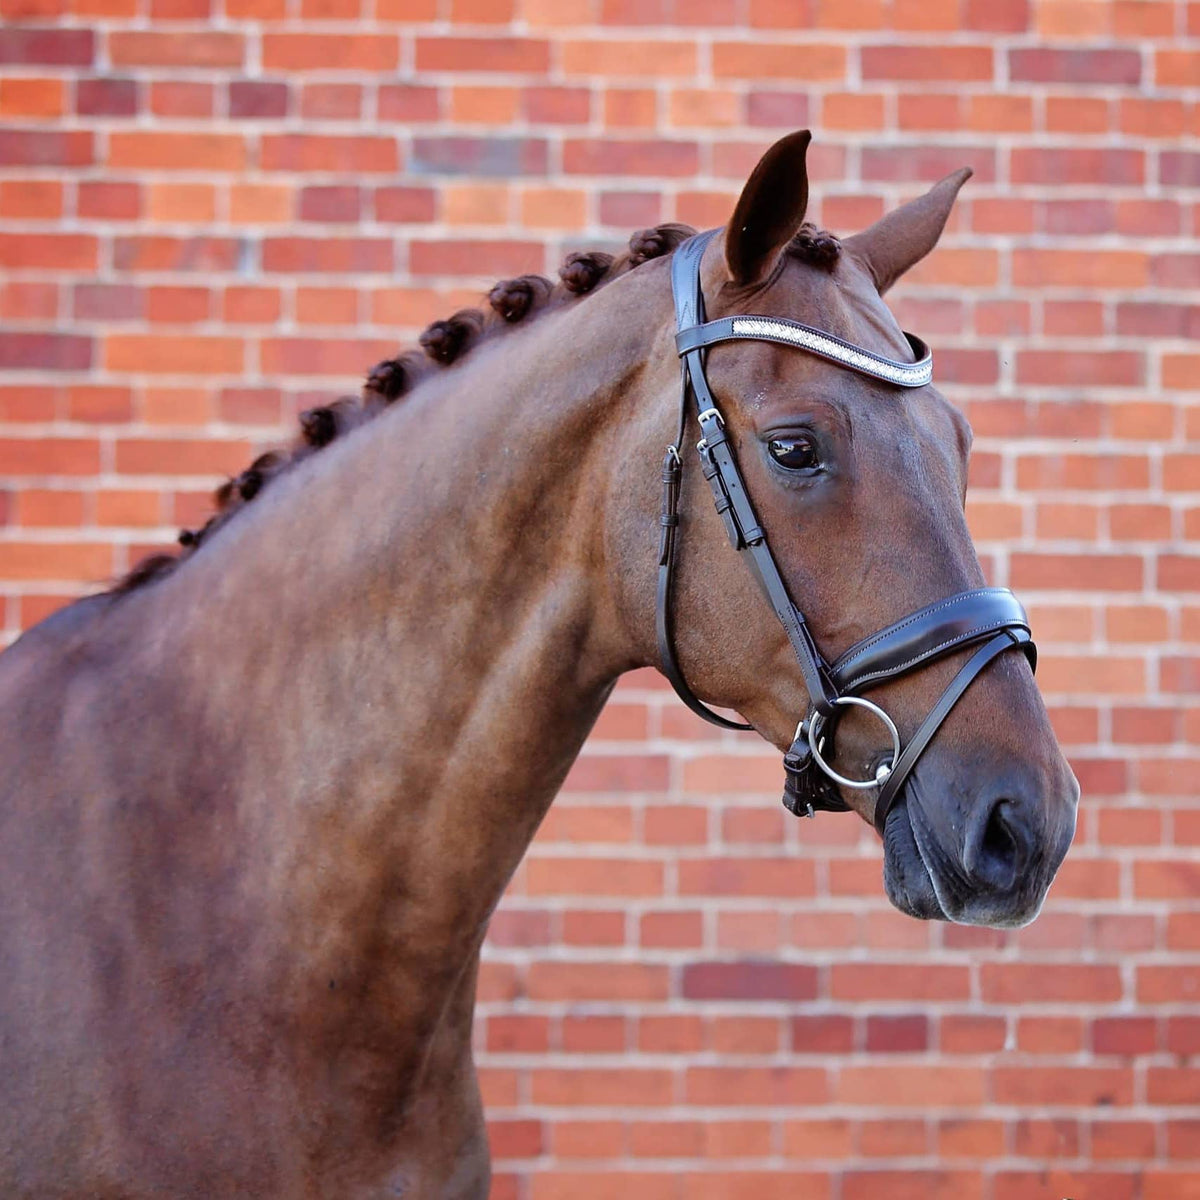 Chestnut horse wearing leather majesty bridle with diamante brow band.